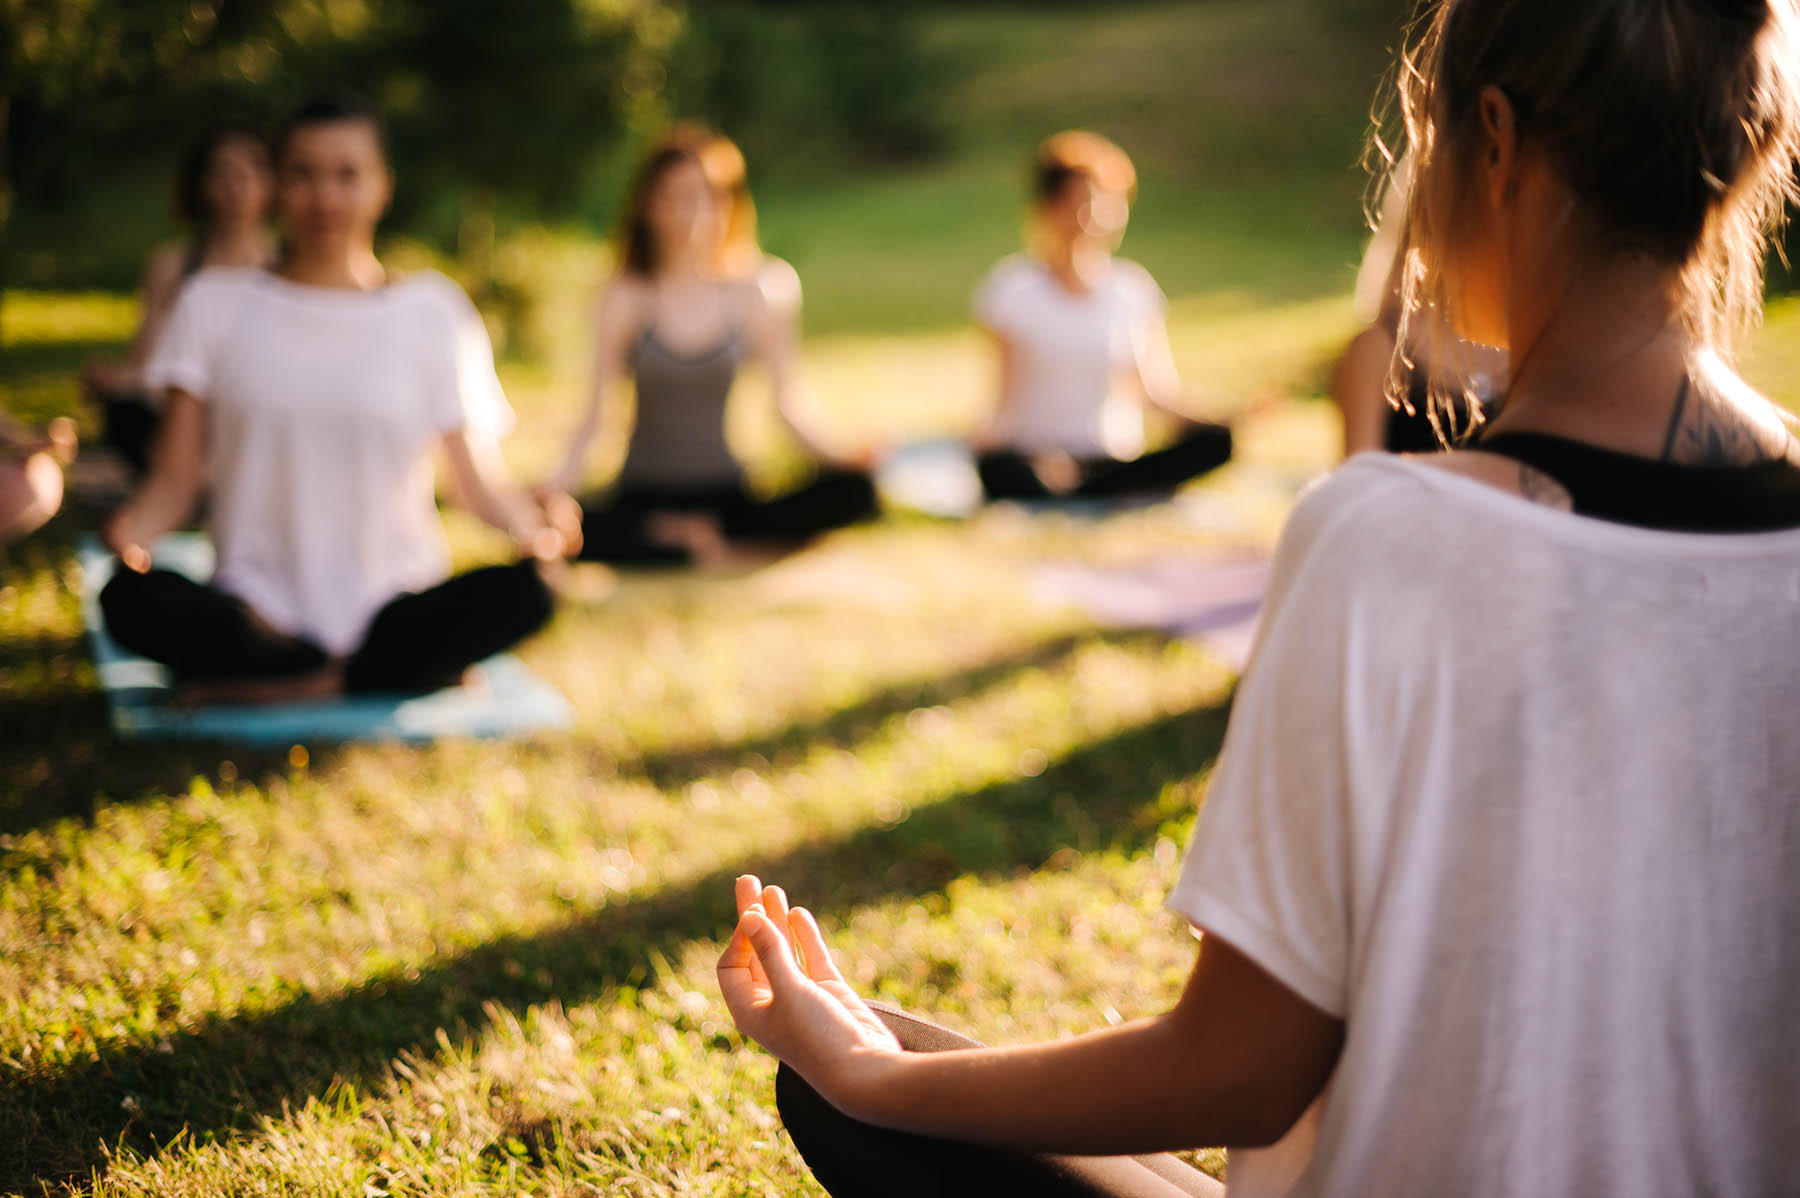 Hocking Hills Yoga in Nature: Find Your Zen Amidst Natural Beauty